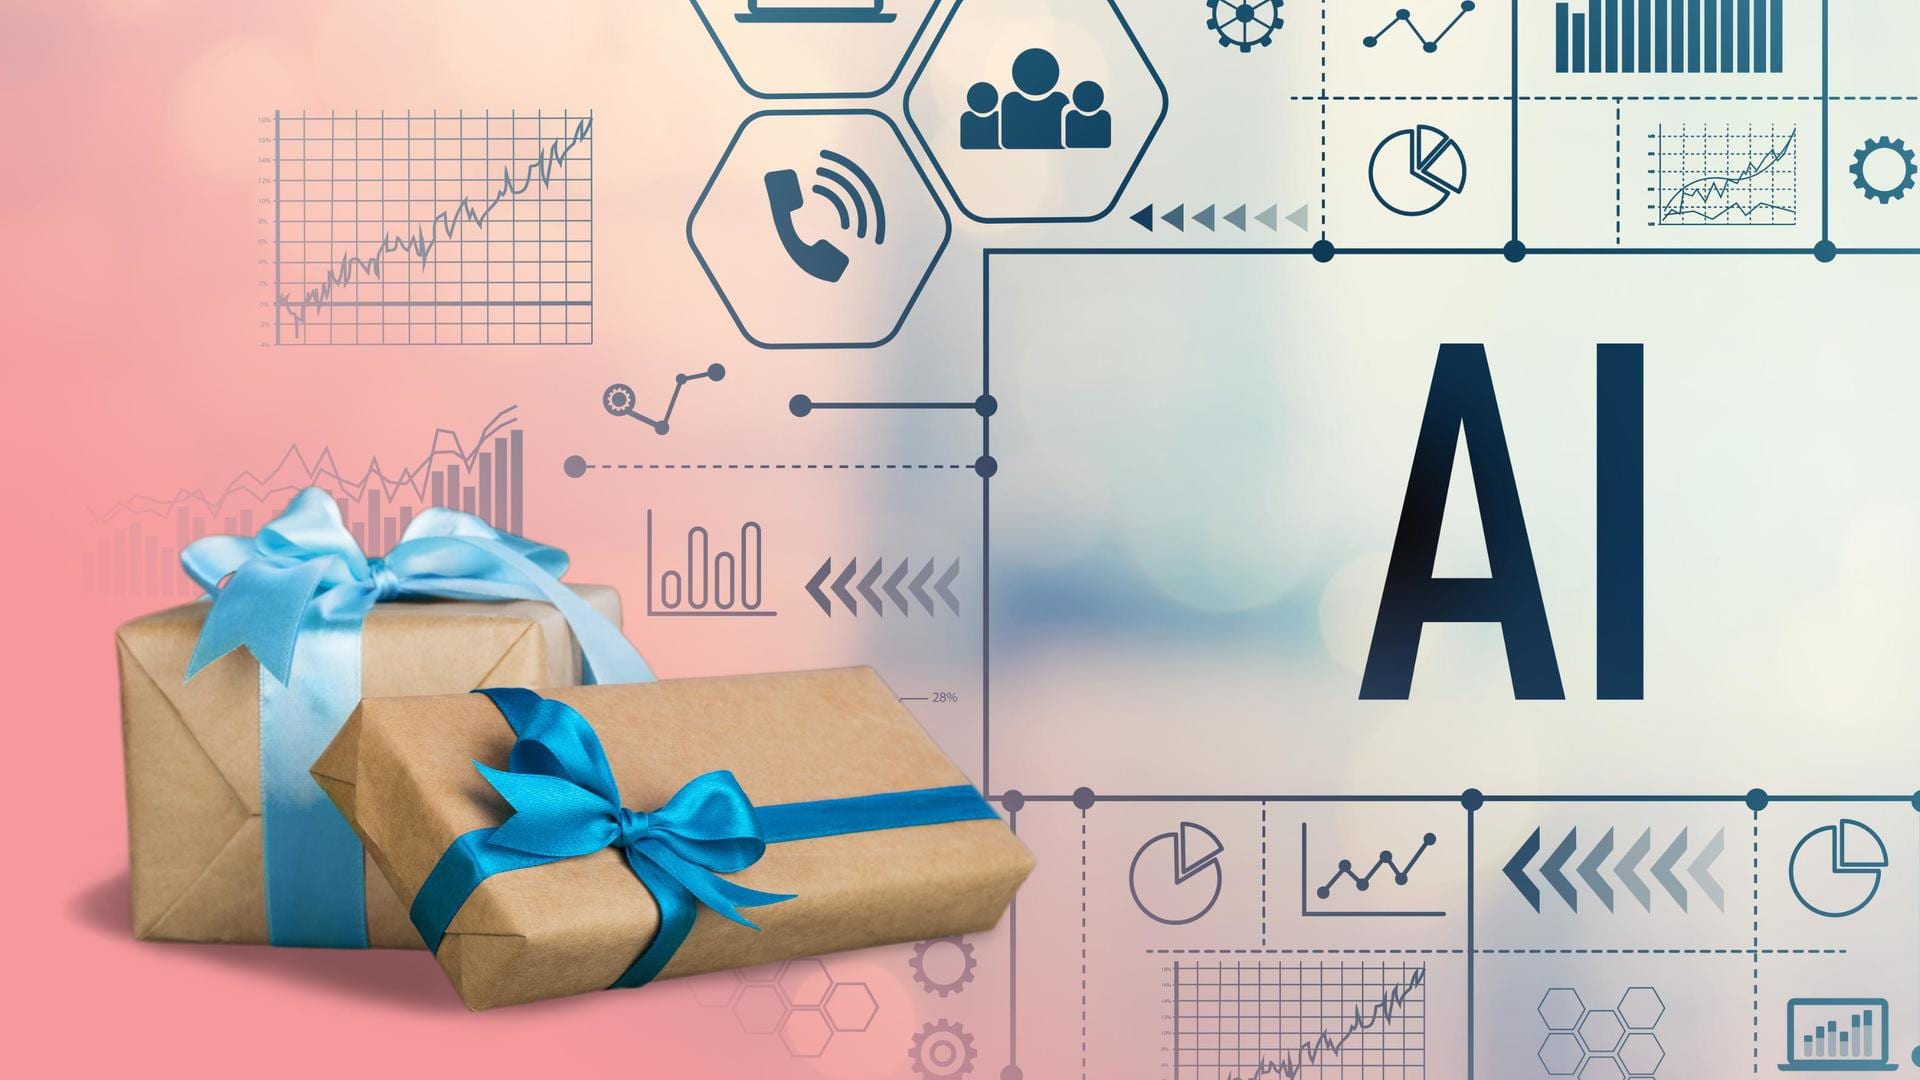 Has gifting become easier with artificial intelligence? Let's find out